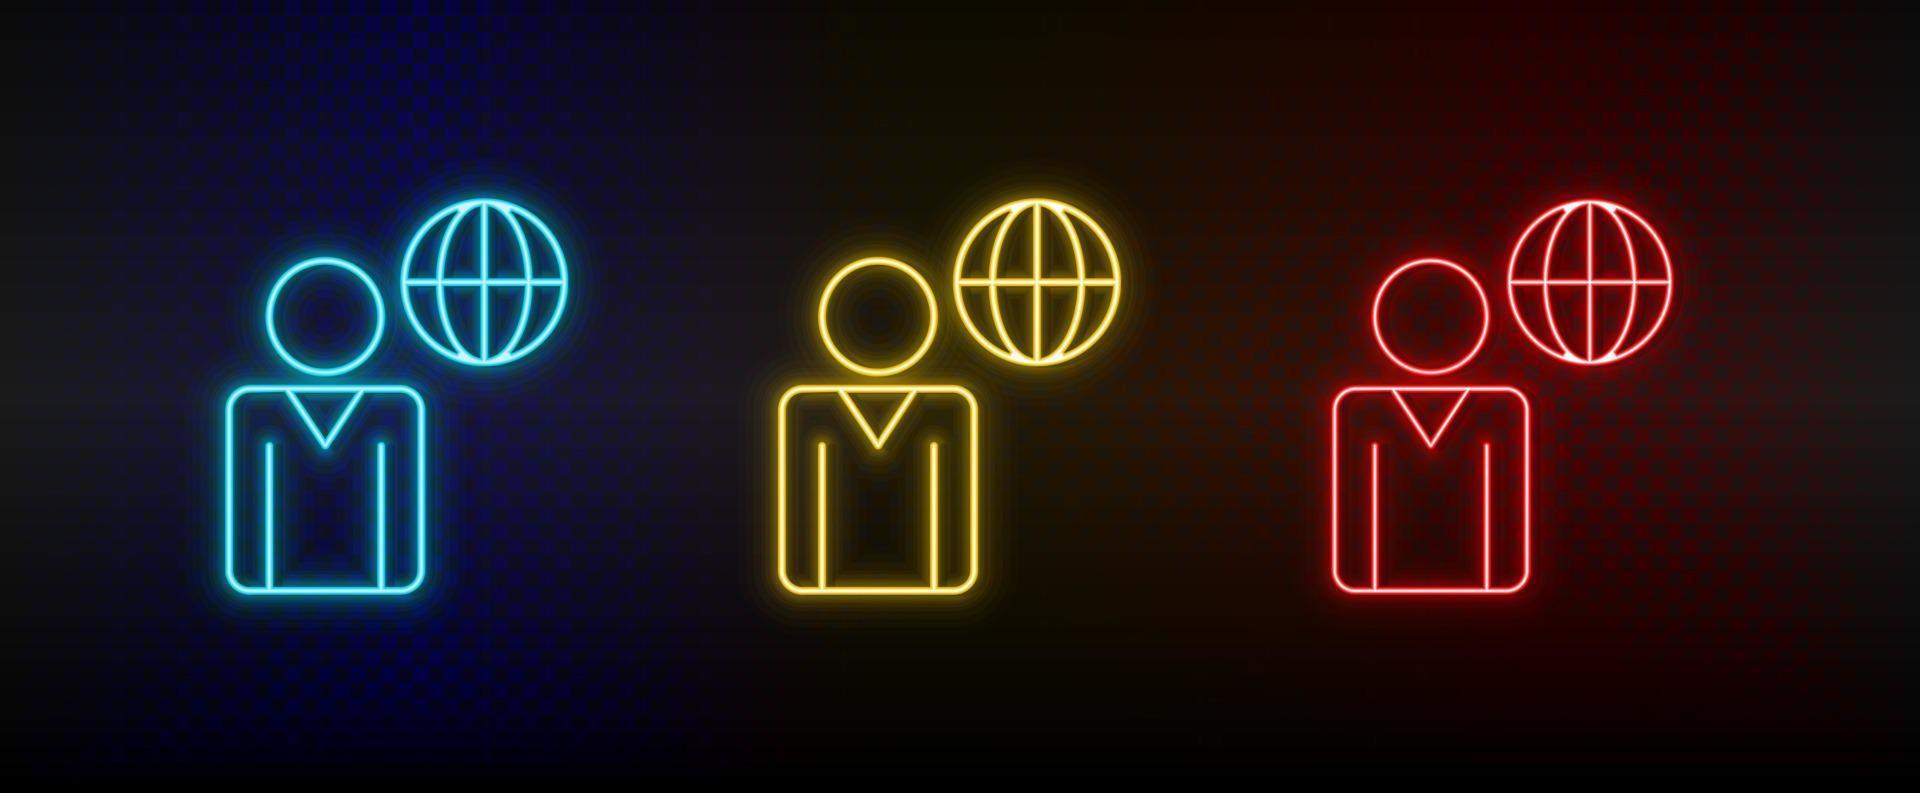 Neon icon set businessman, global business. Set of red, blue, yellow neon vector icon on transparency dark background